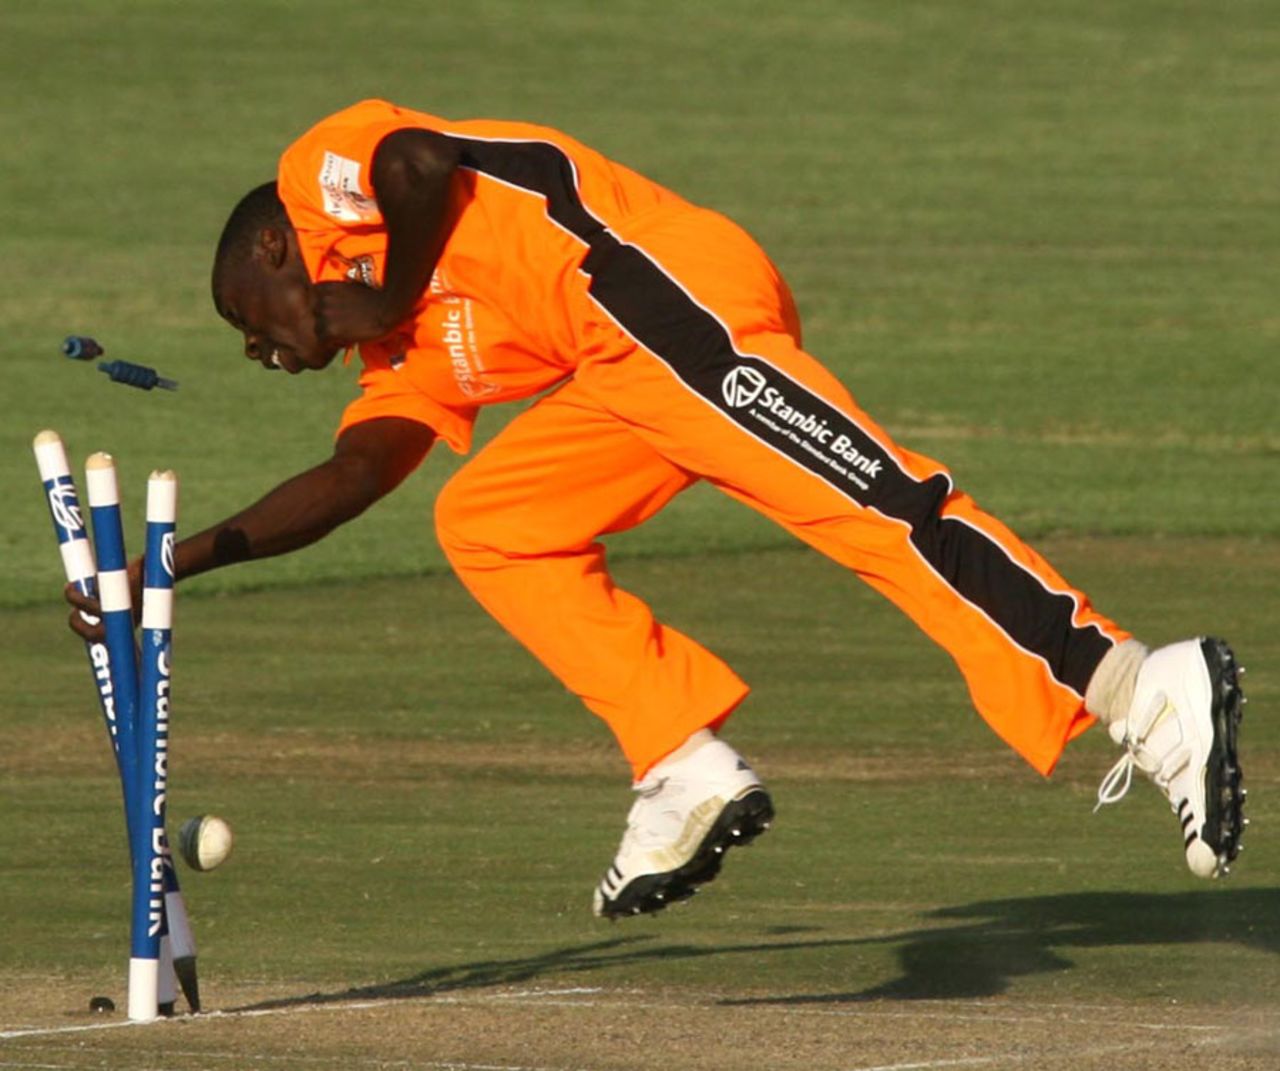 Trevor Garwe completes a 31-run victory for the Eagles with a run-out, Mashonaland Eagles v Mountaineers, Stanbic Bank 20 Series, Harare, November 16, 2010